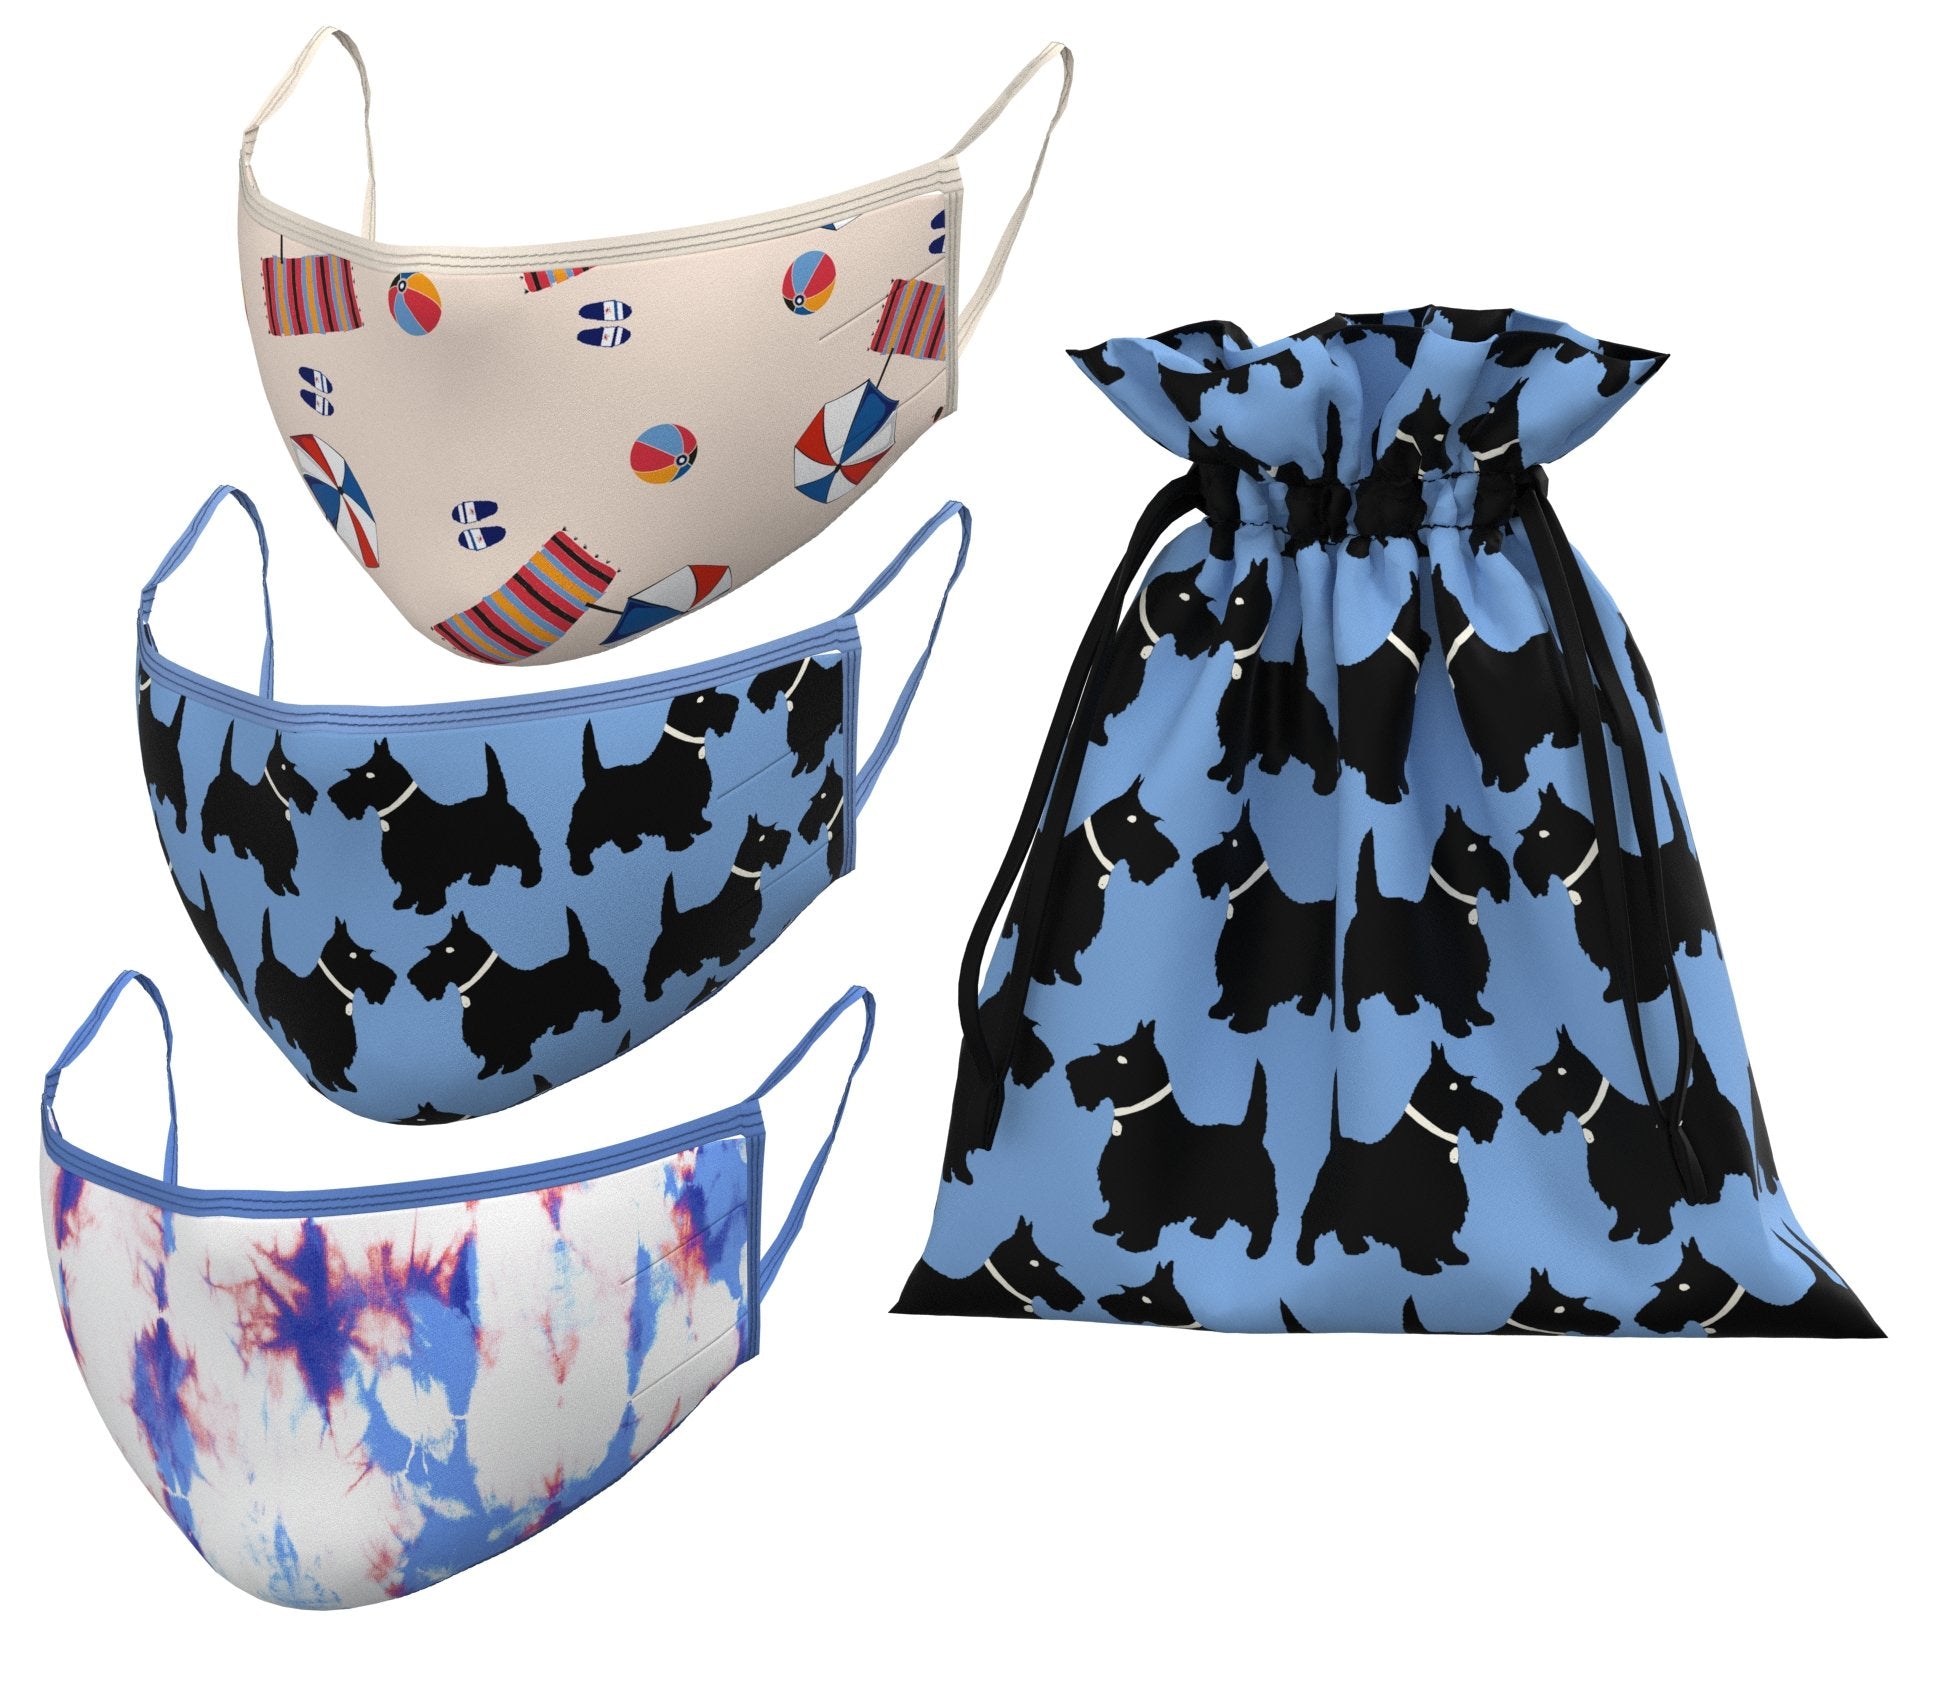 'Shades of Blue' Trio including Mask Pouch - The Three Maskateers